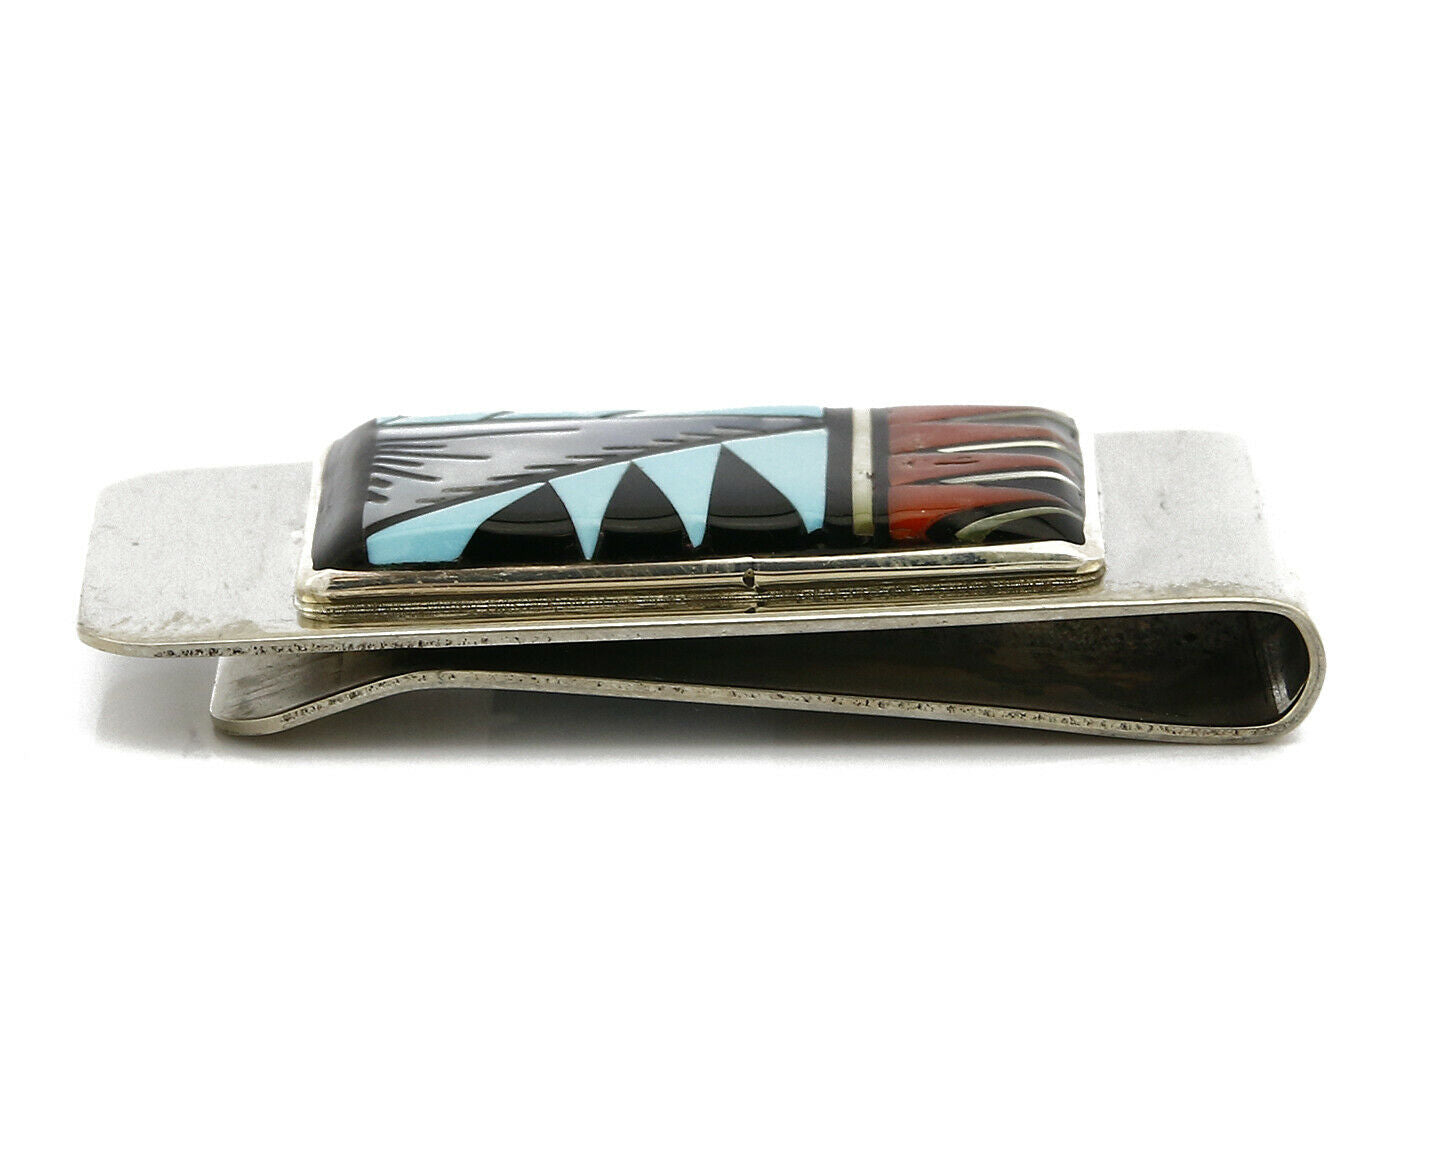 Zuni Signed C Booque Money Clip .925 Sterling Multiple Natural Mined Gemstones